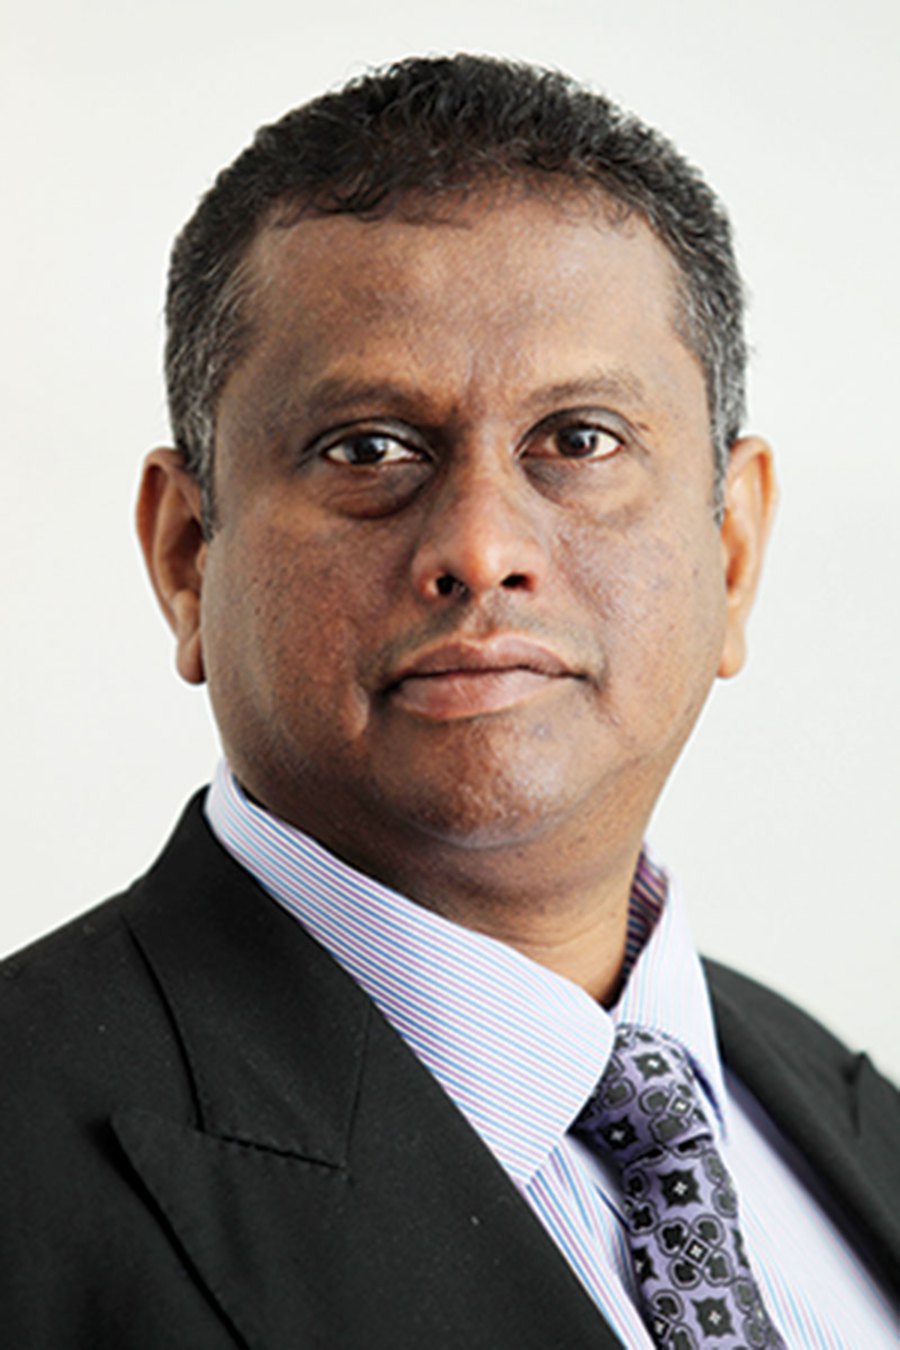 Knight Frank Malaysia managing director Sarkunan Subramaniam says, The second half of 2017 saw developers shifting their focus to the middle-income and affordable housing segments to cater to a wider target catchment.